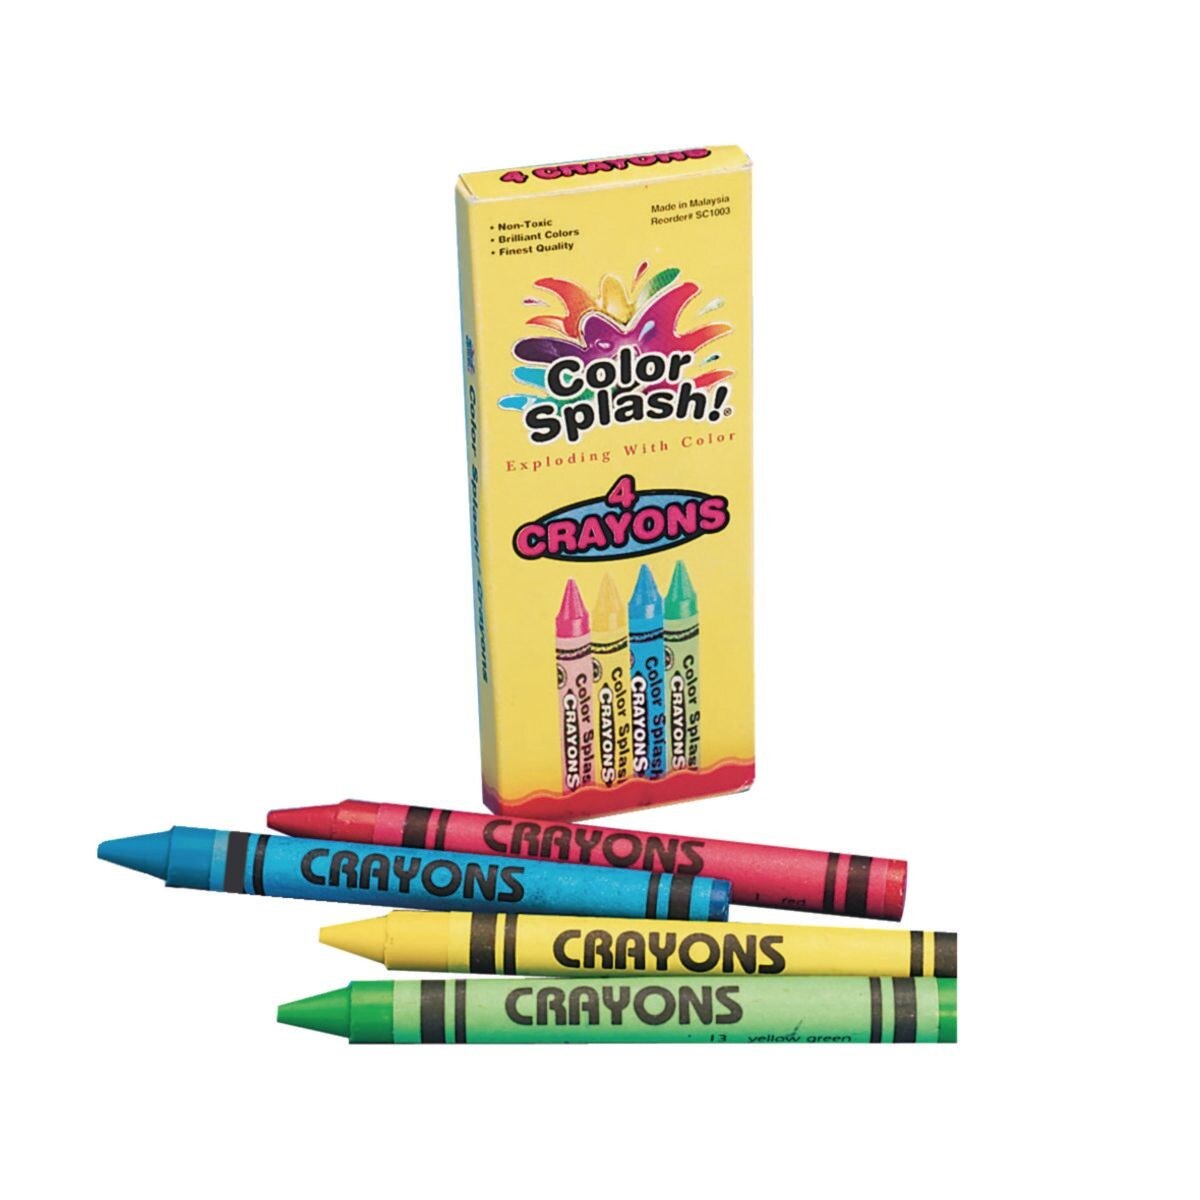 Back to School Crayons - 36 Packs of 24 Crayon Sets